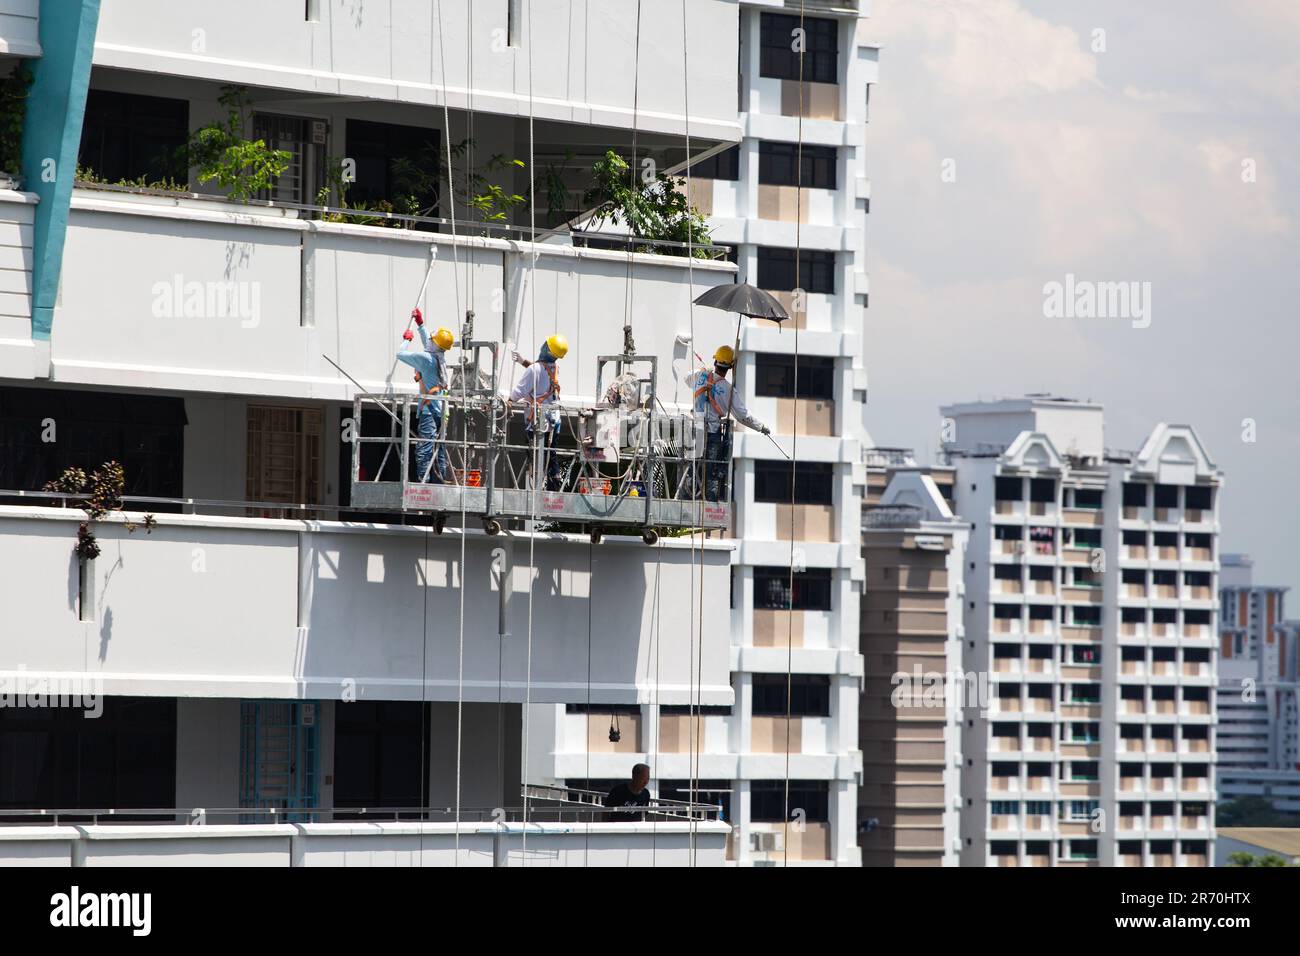 Workers using industrial lift suspended on mid air doing painting job for a building exterior under the hot sun. A very high risk occupation. Stock Photo